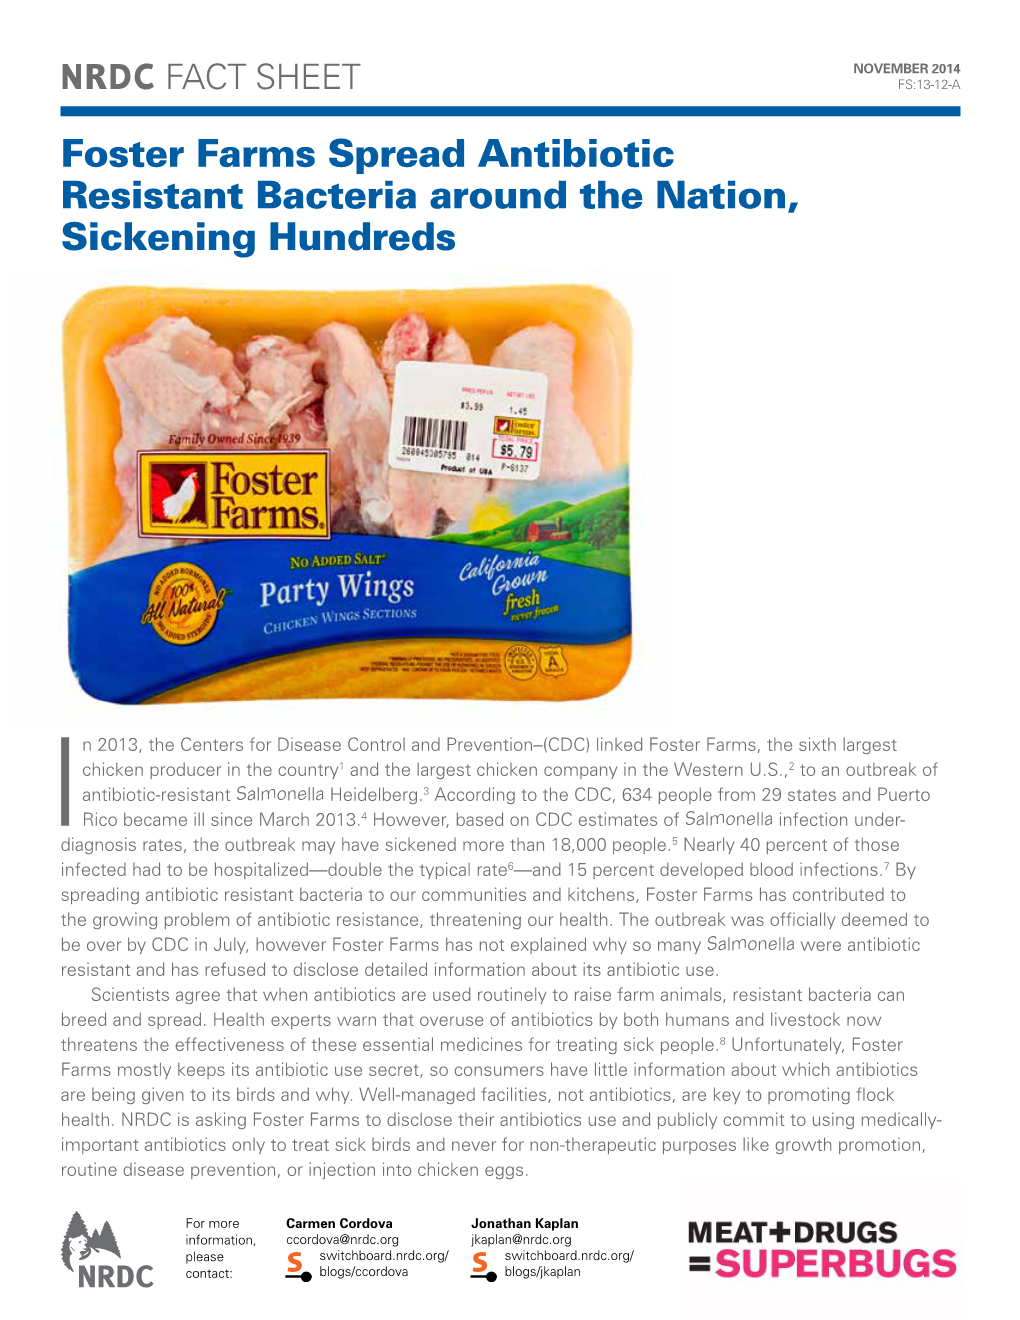 Foster Farms Spread Antibiotic Resistant Bacteria Around the Nation, Sickening Hundreds (PDF)